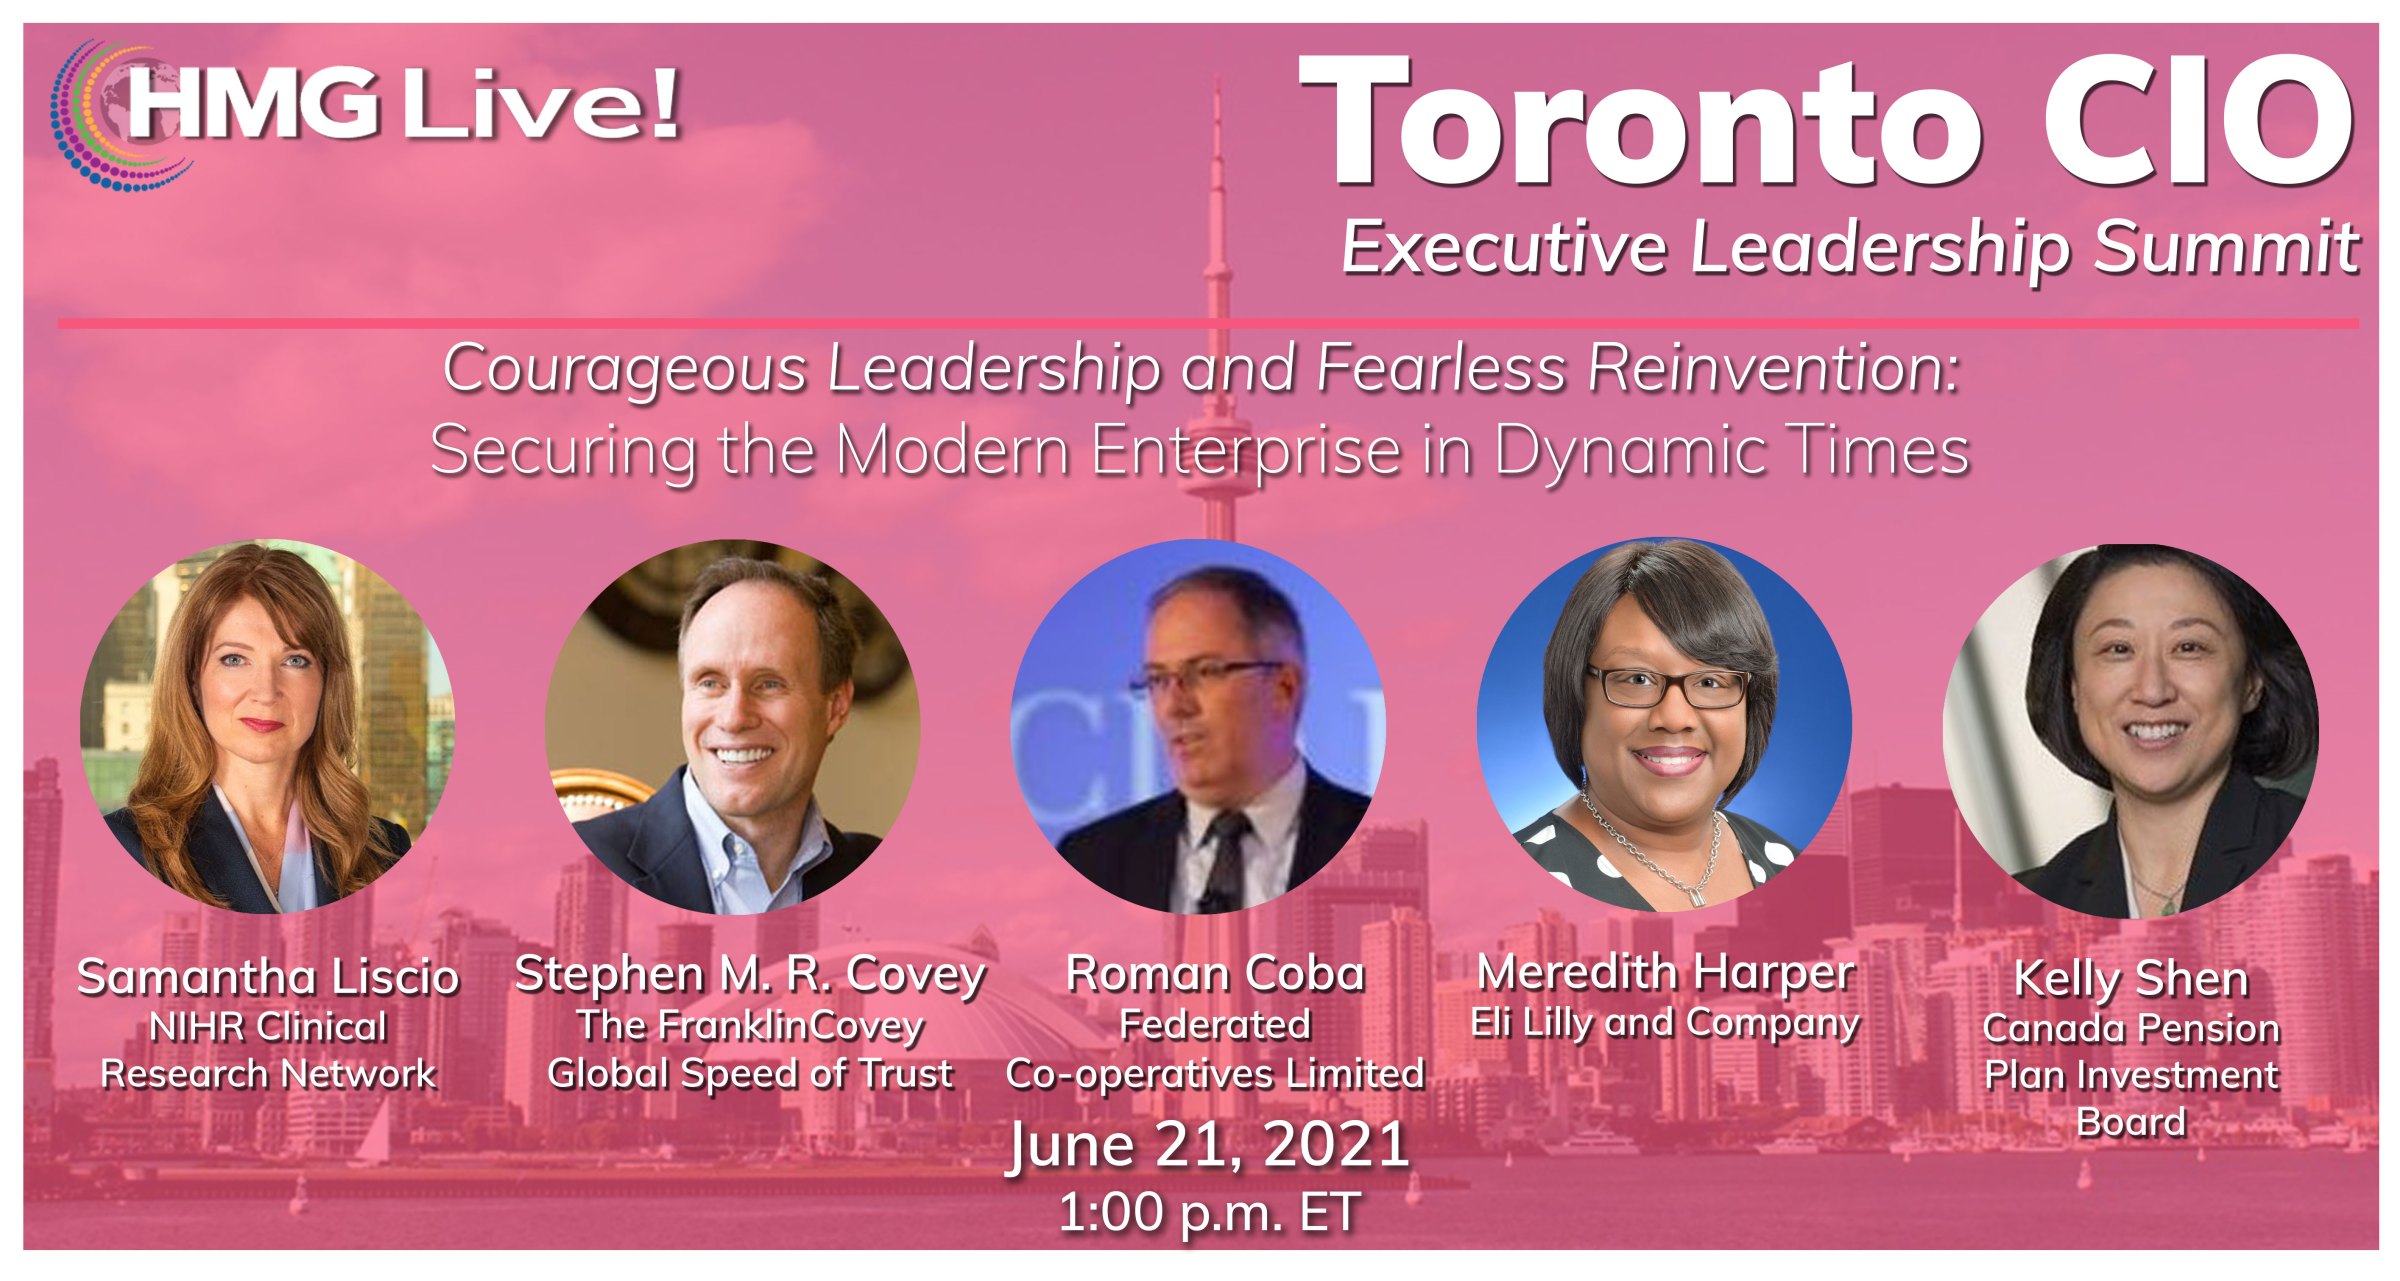 CIO Leadership: Fearlessly Reinventing the Business Will Drive the Discussion at the 2021 HMG Live! Toronto CIO Executive Leadership Summit on June 21